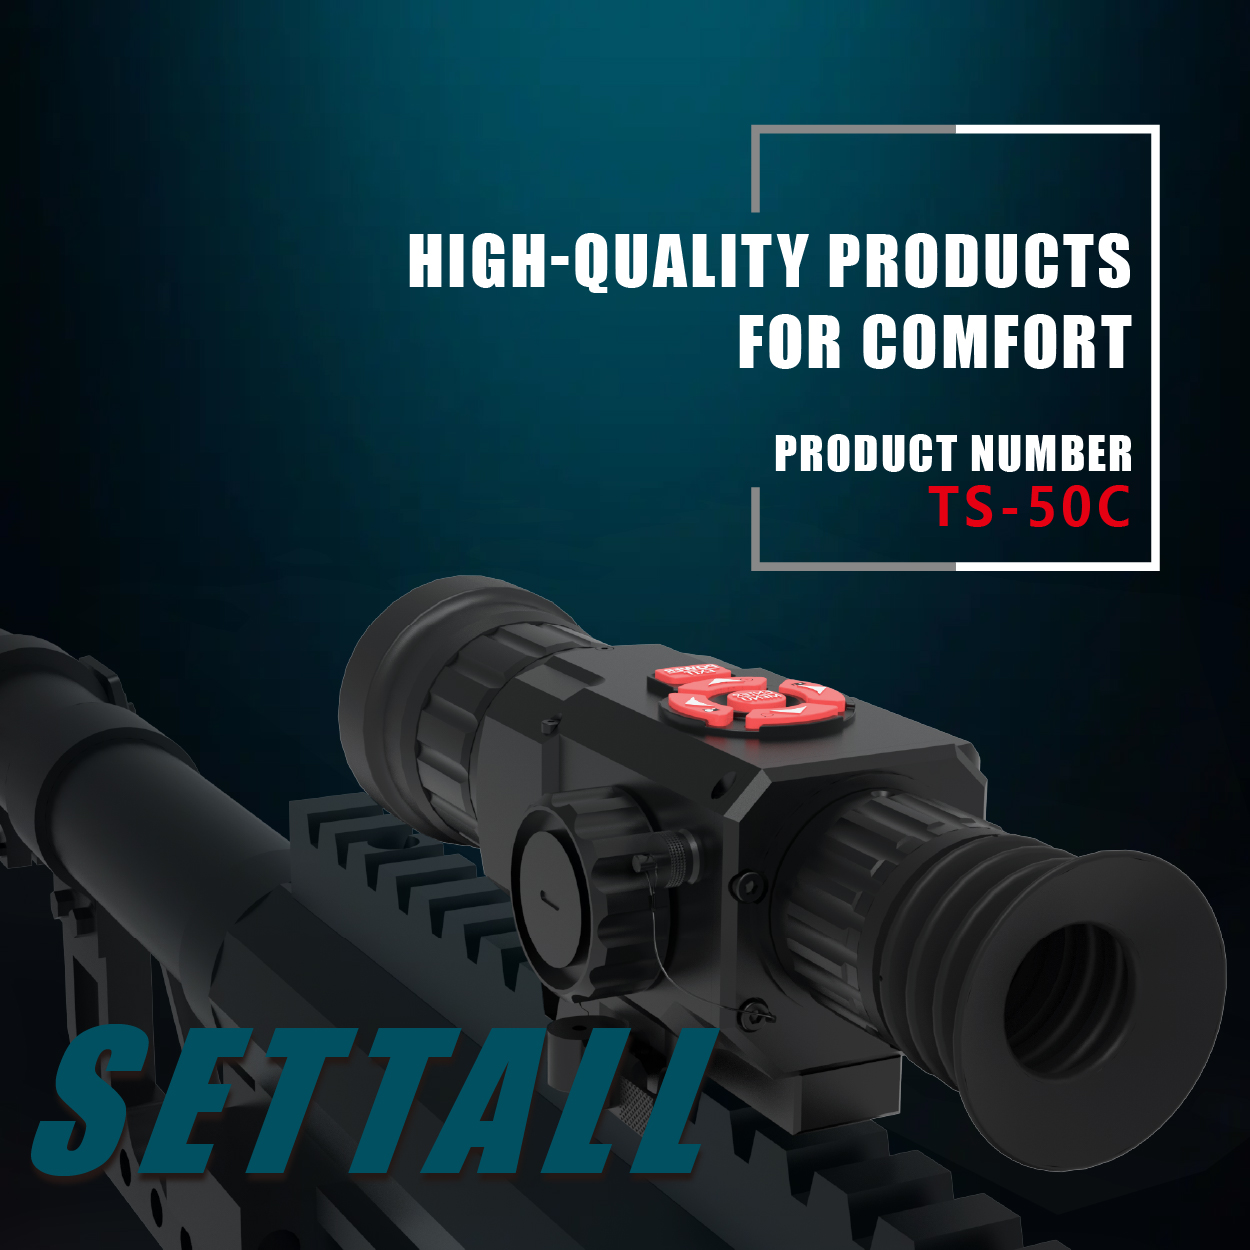 SETTALL TS-C-Monocular Multi-funcation Thermal Image System(Concise version)